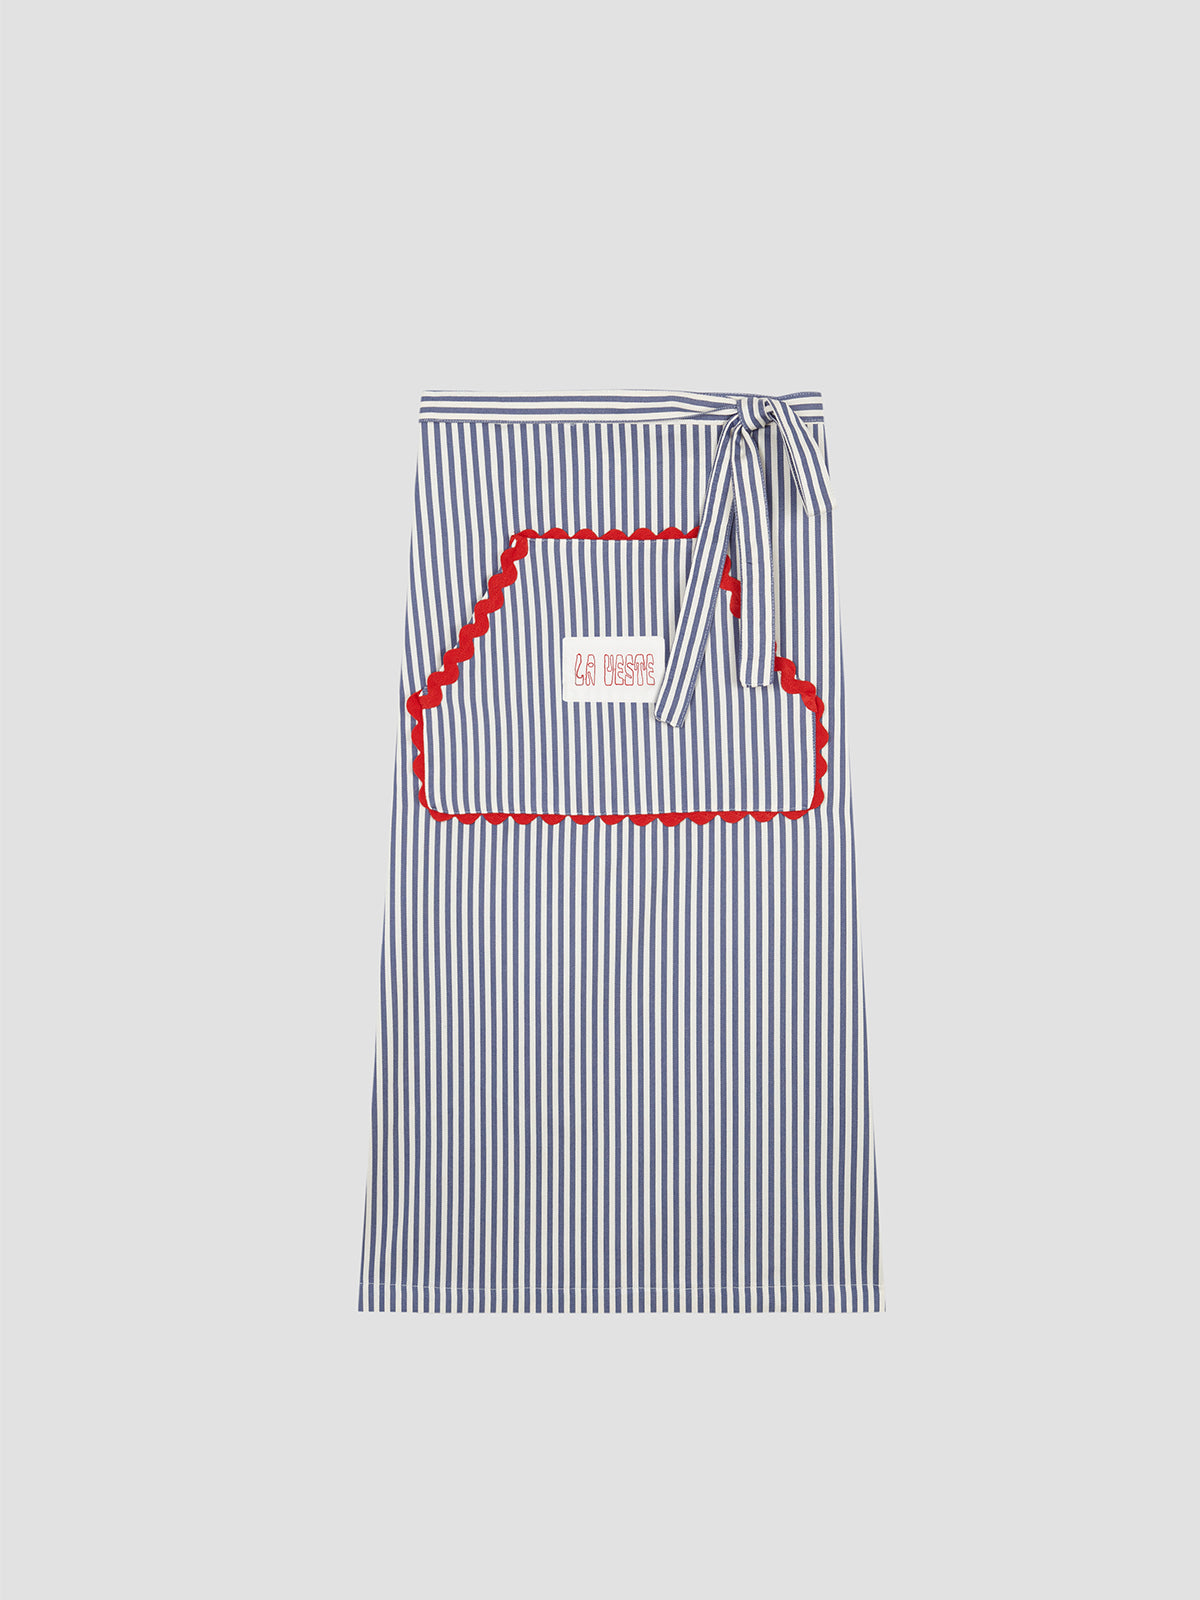 Apron Striped Blue is a blue and white striped apron with matching red piping detail. 